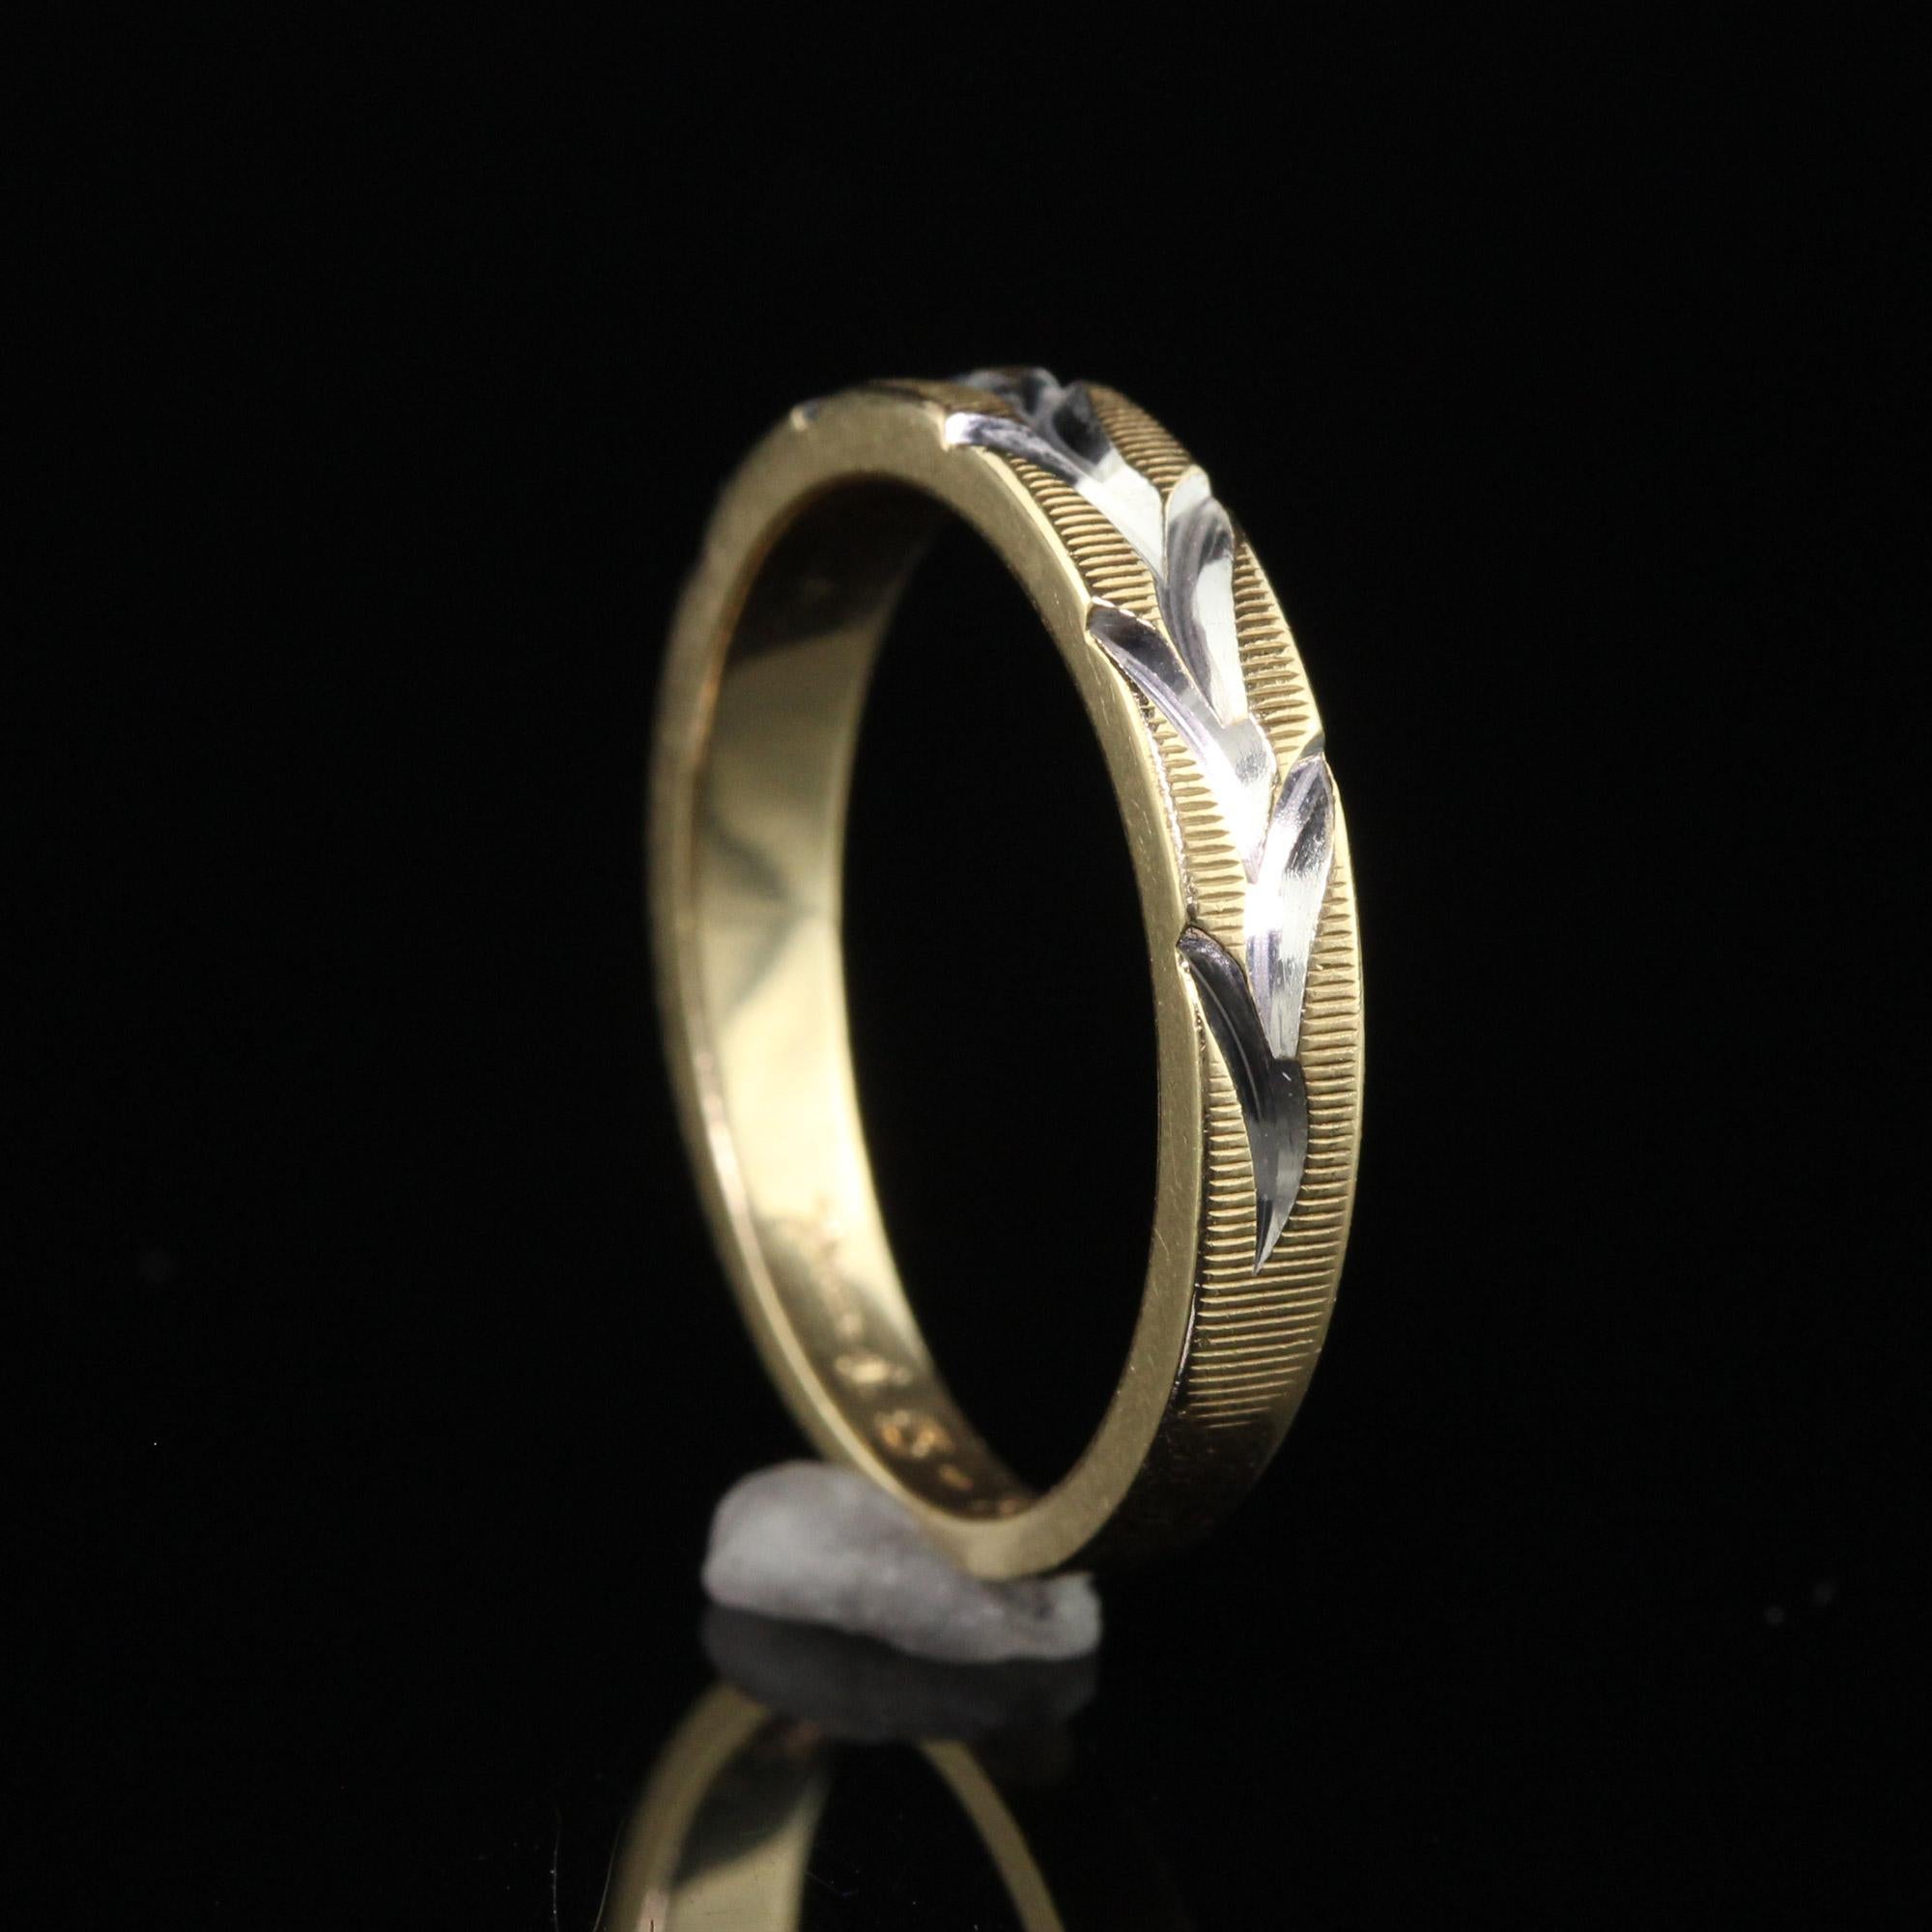 Women's Vintage Estate 14K Yellow Gold Two Tone Engraved Floral Wedding Band Size 5 1/2 For Sale